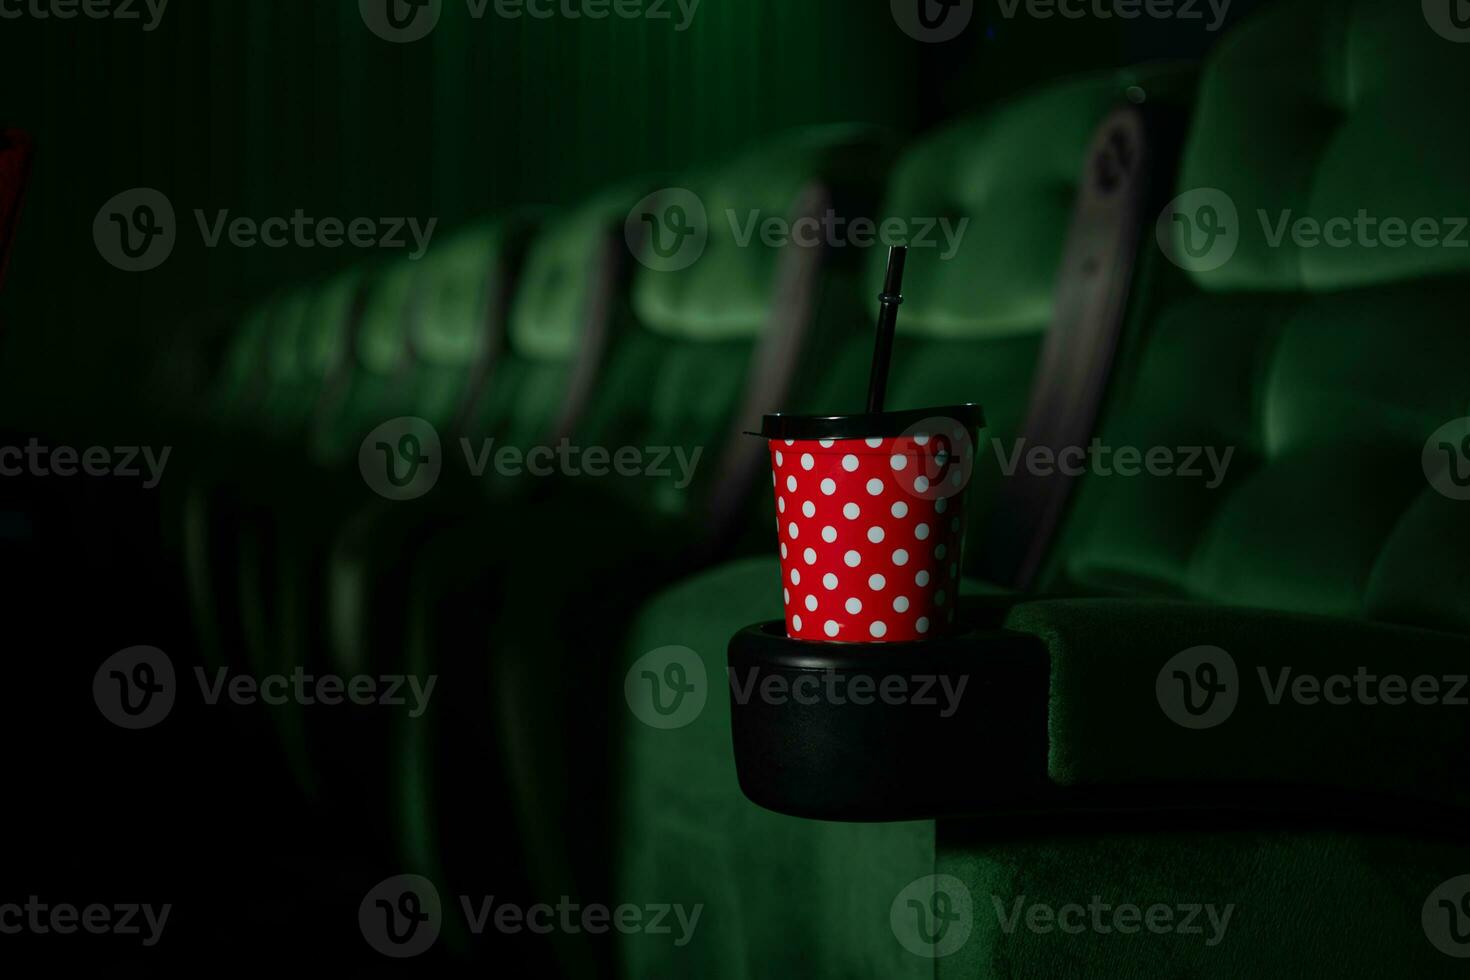 Cinema auditorium with green seats and a red cup of drink photo